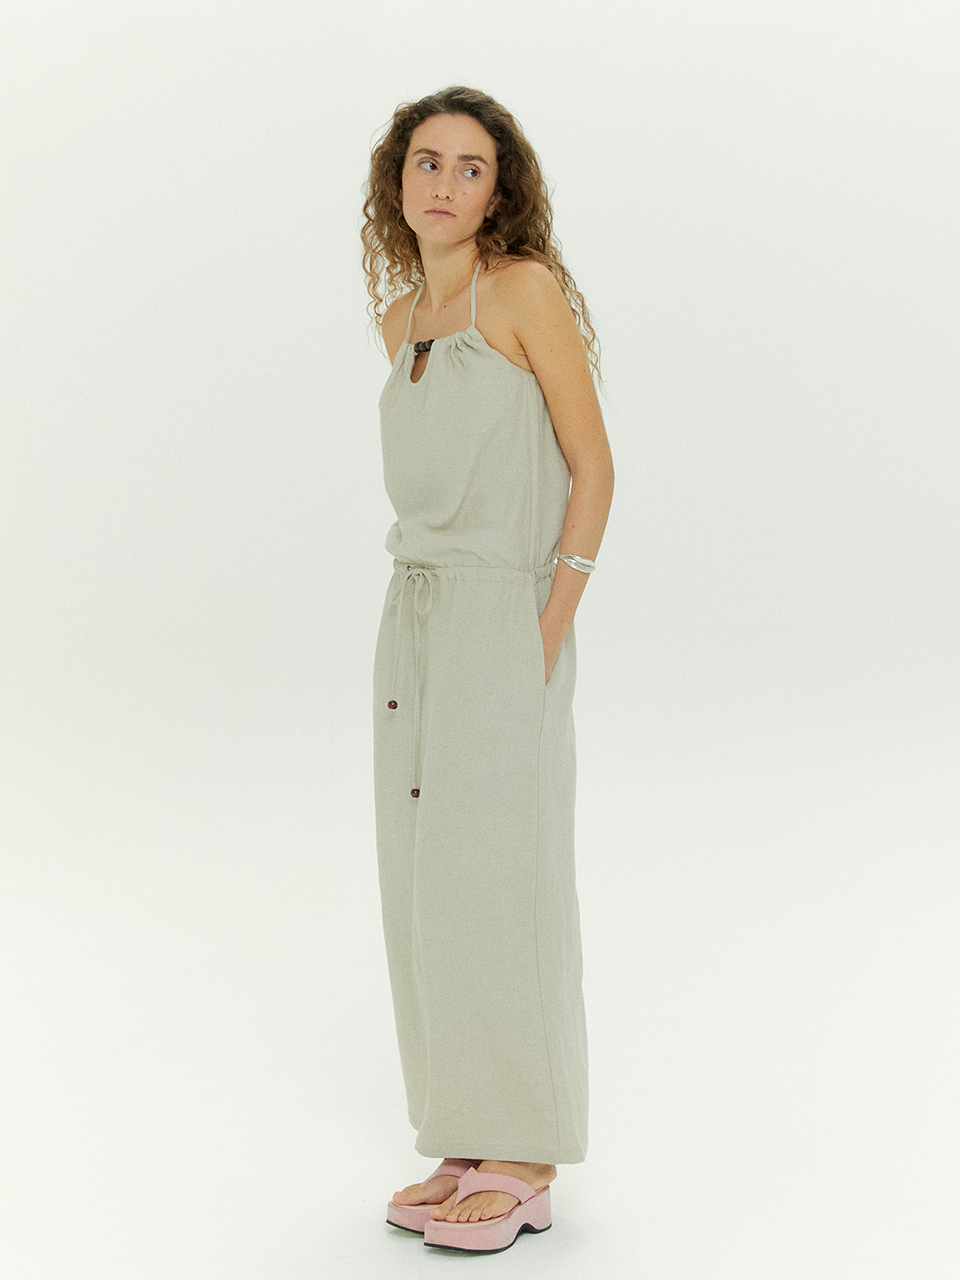 [20%OFF]Beads Halter Maxi Dress in Natural